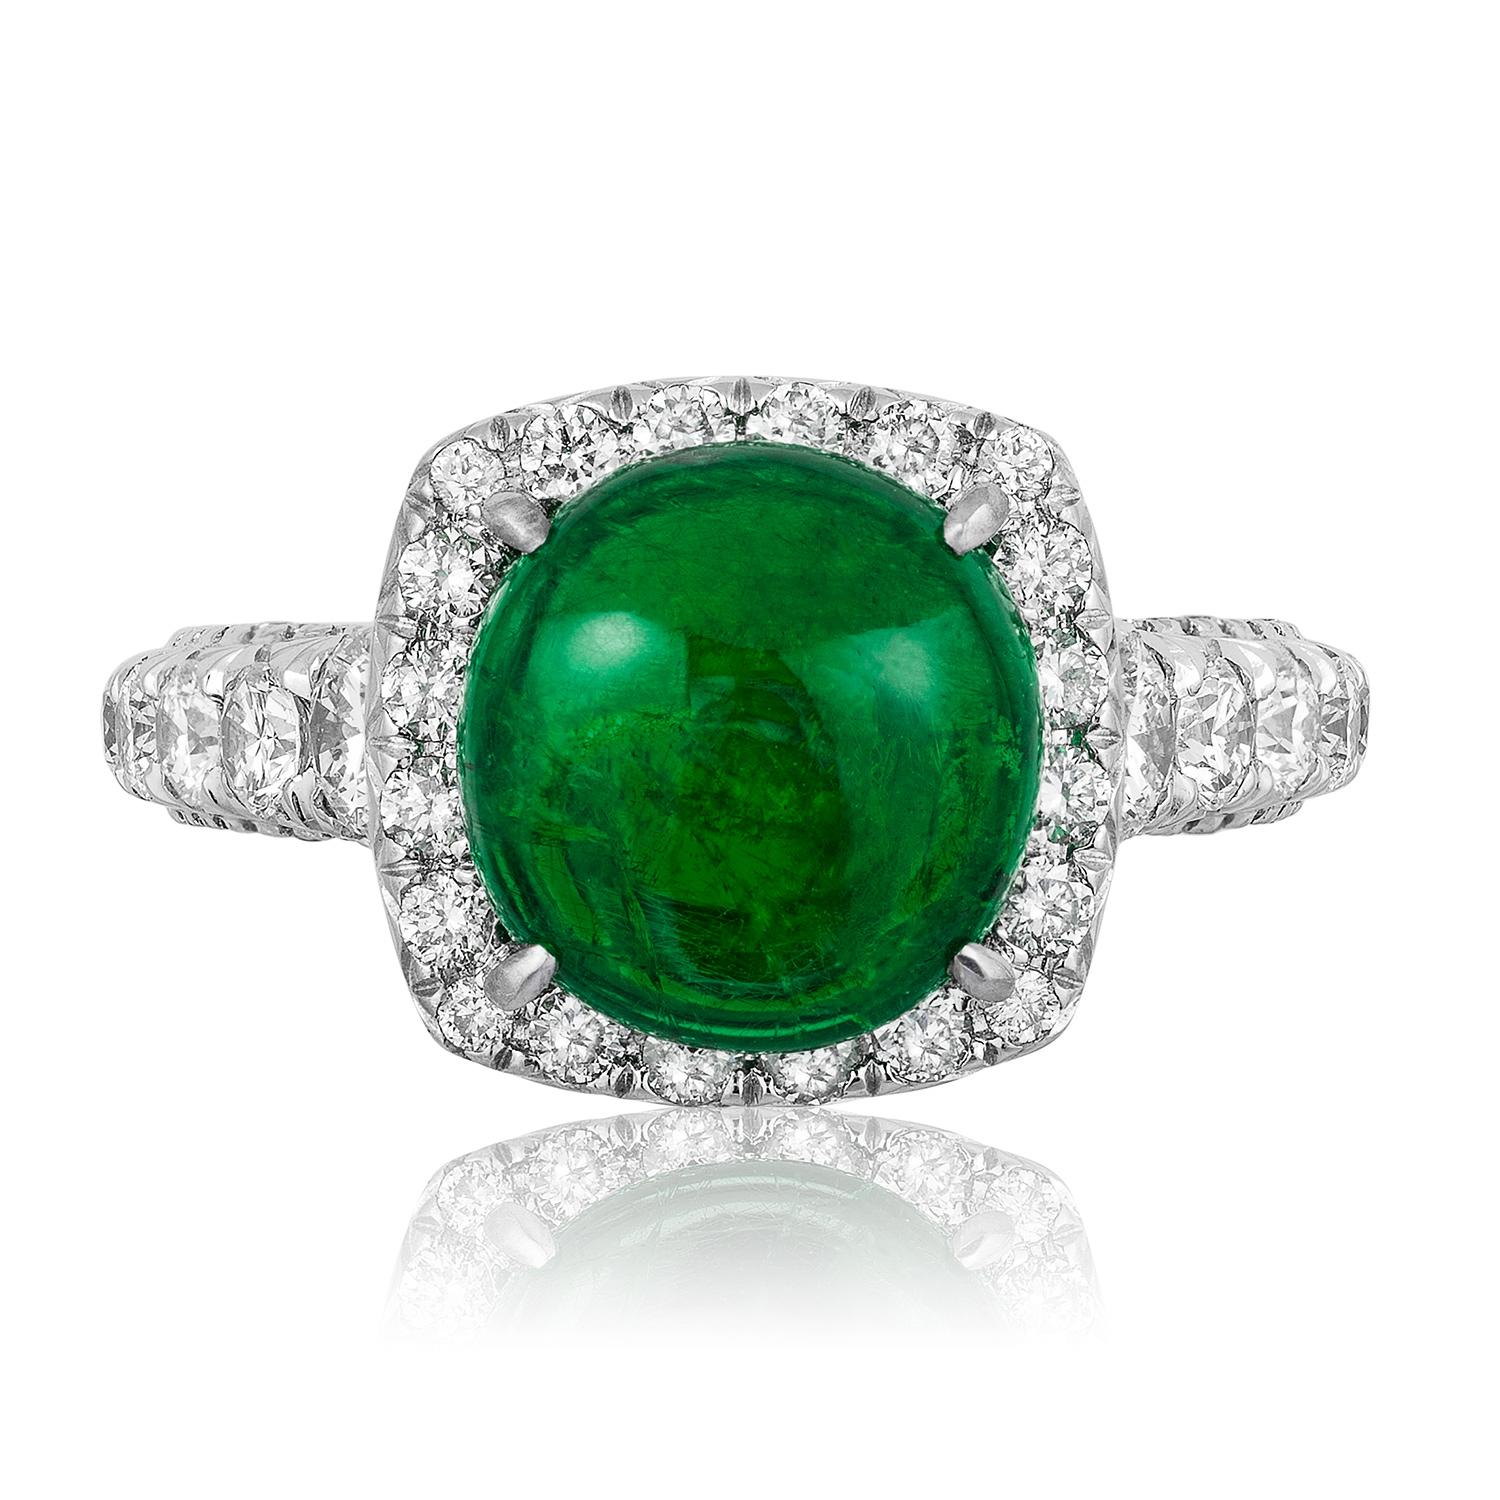 Andreoli 3.50 Carat Emerald Diamond 18 Karat White Gold Ring CDC Certified

This ring features:
- 2.00 Carat Diamond
- 3.50 Carat Emerald Sandawana CDC Certified
- 7.90 Gram 18k Gold
- Made In Italy